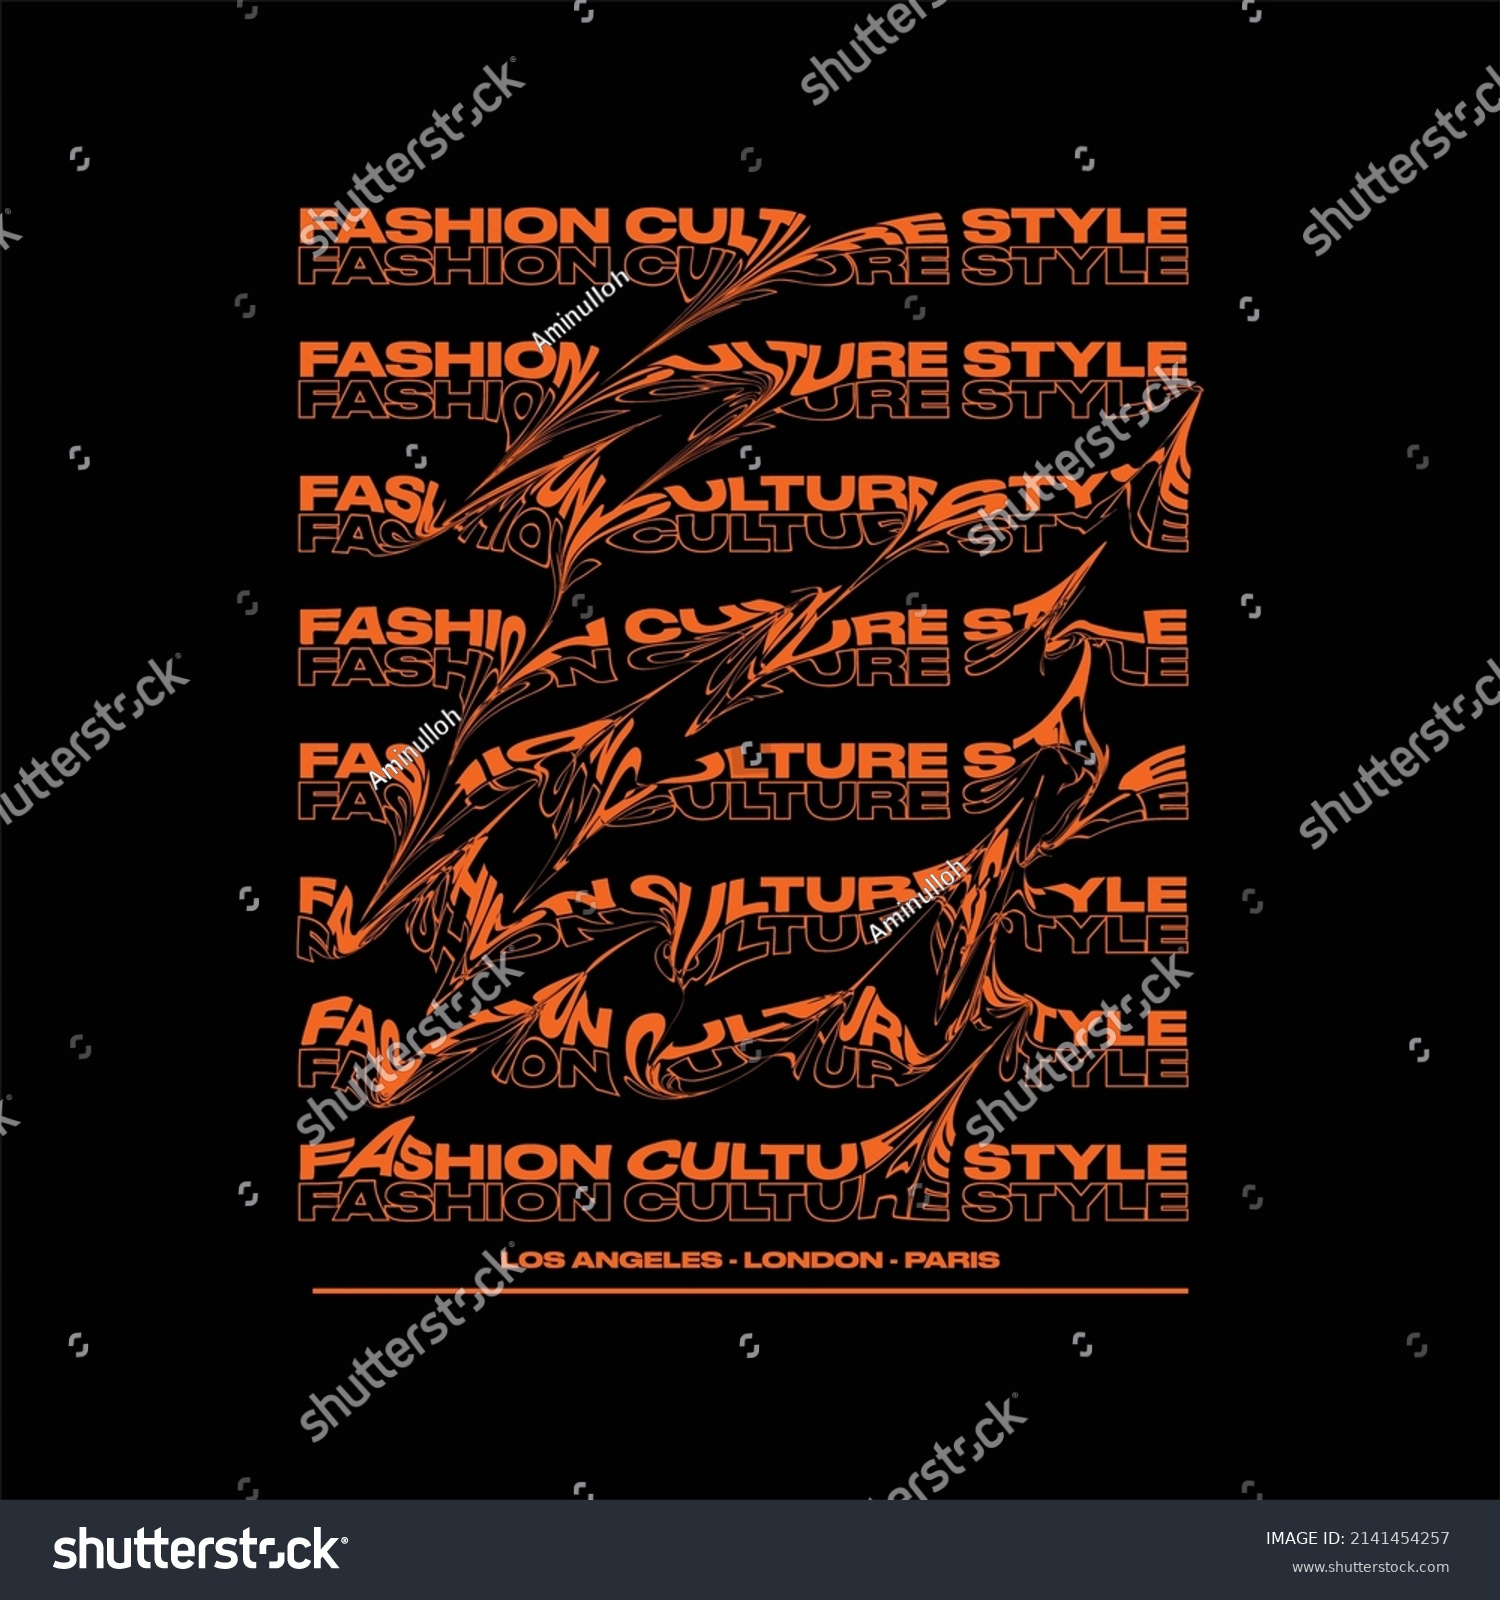 Fashion Culture Simple Vintage Fashion Stock Vector (Royalty Free ...